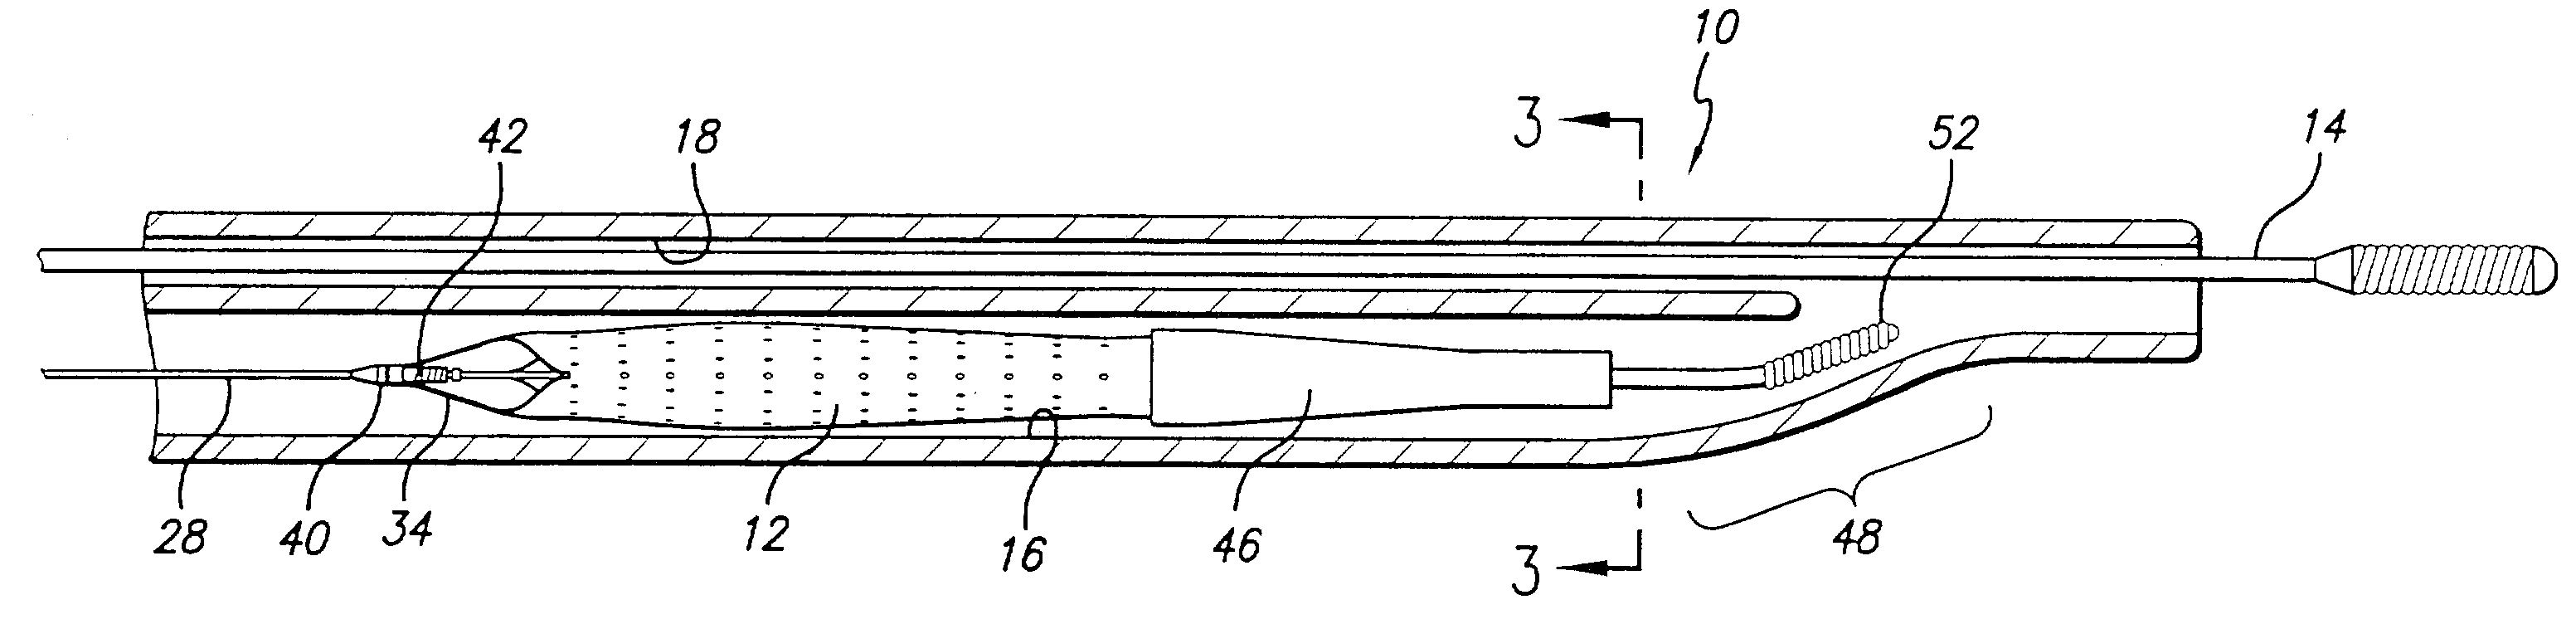 Delivery systems for embolic filter devices